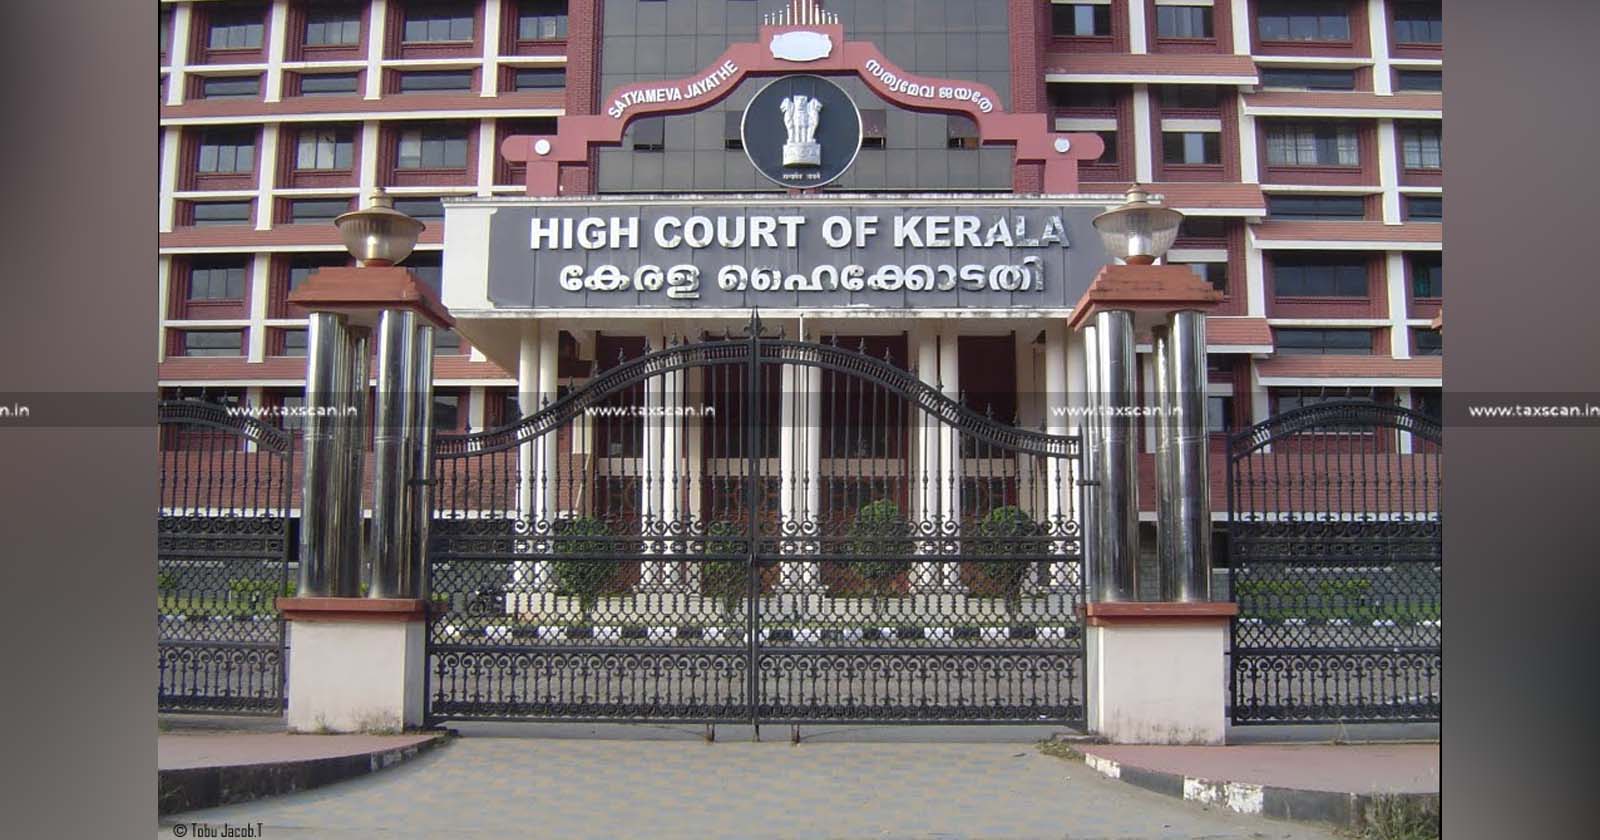 Failure to Issue Notice - kerala hc - income tax act - assessment order - taxscan